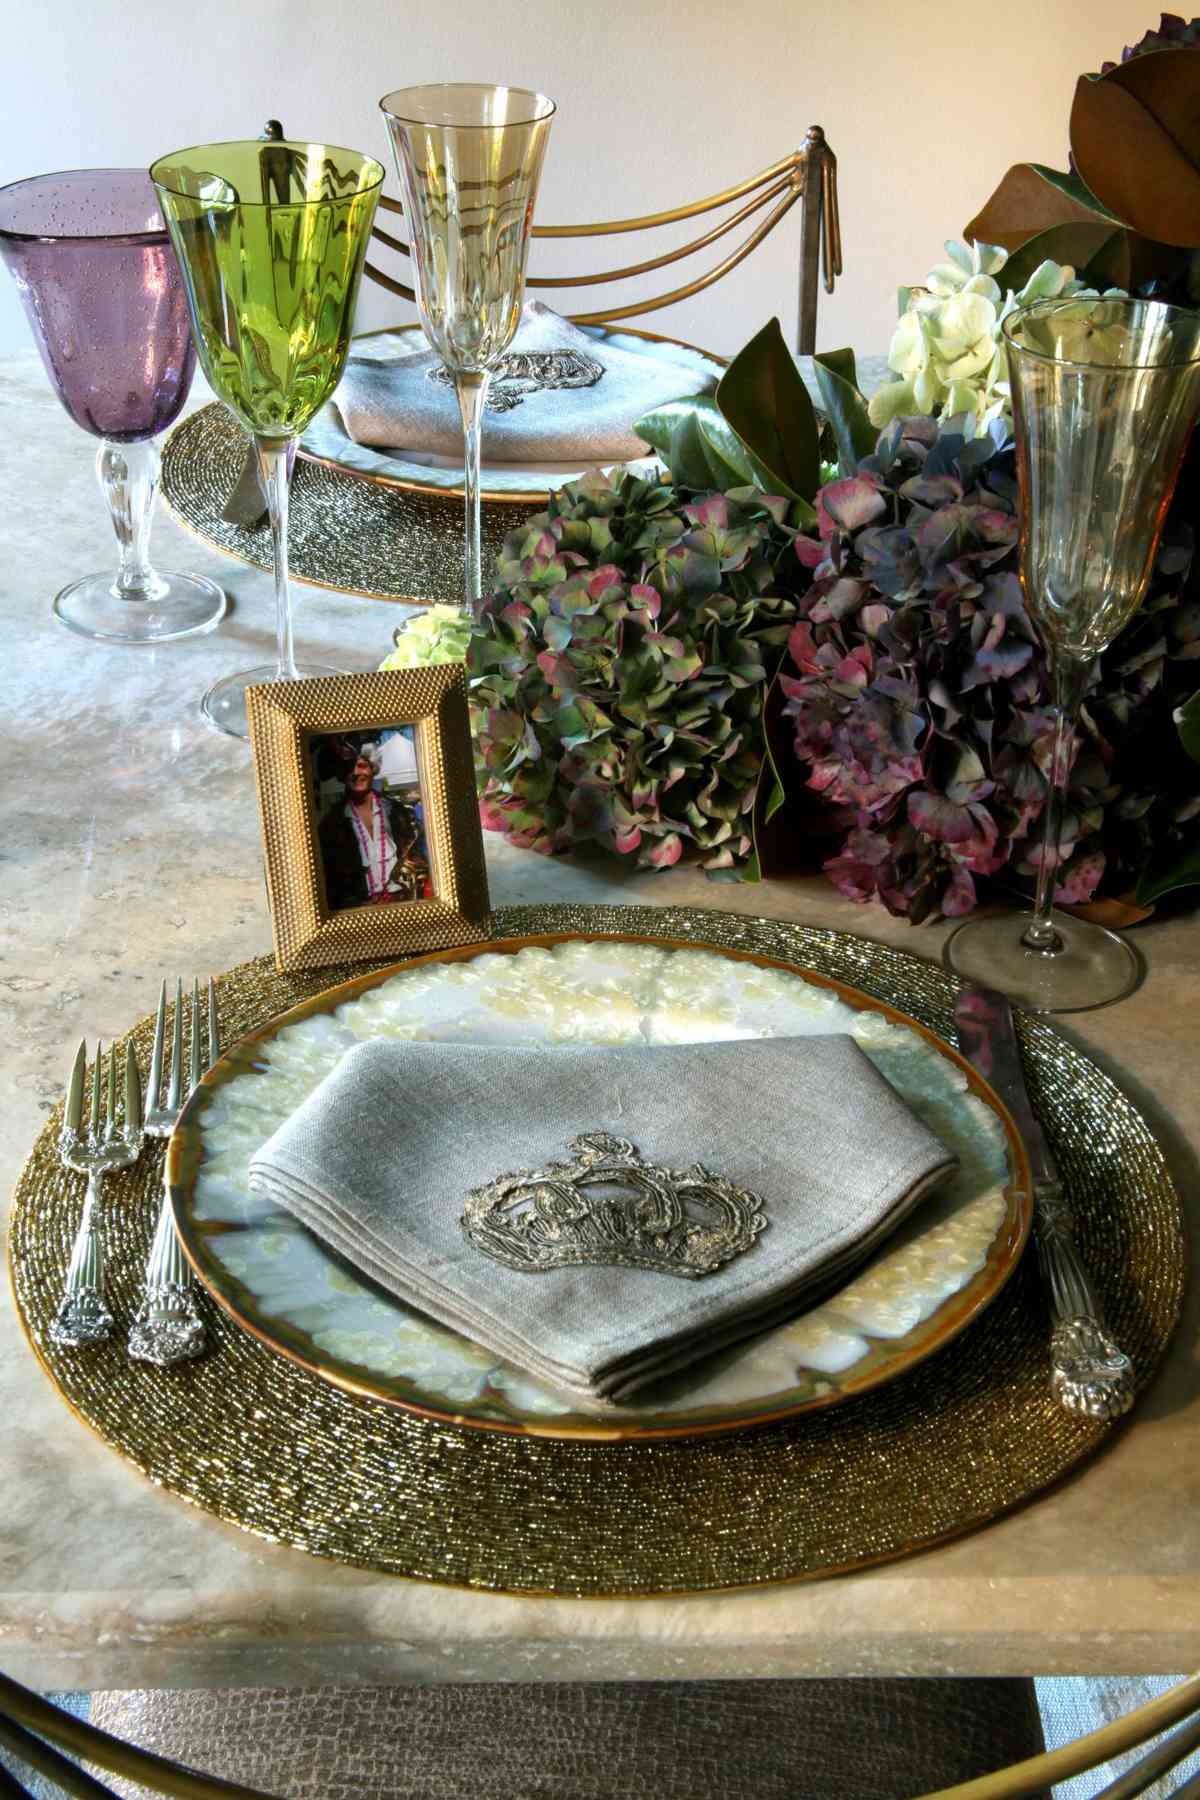 Mix Up the Place Setting